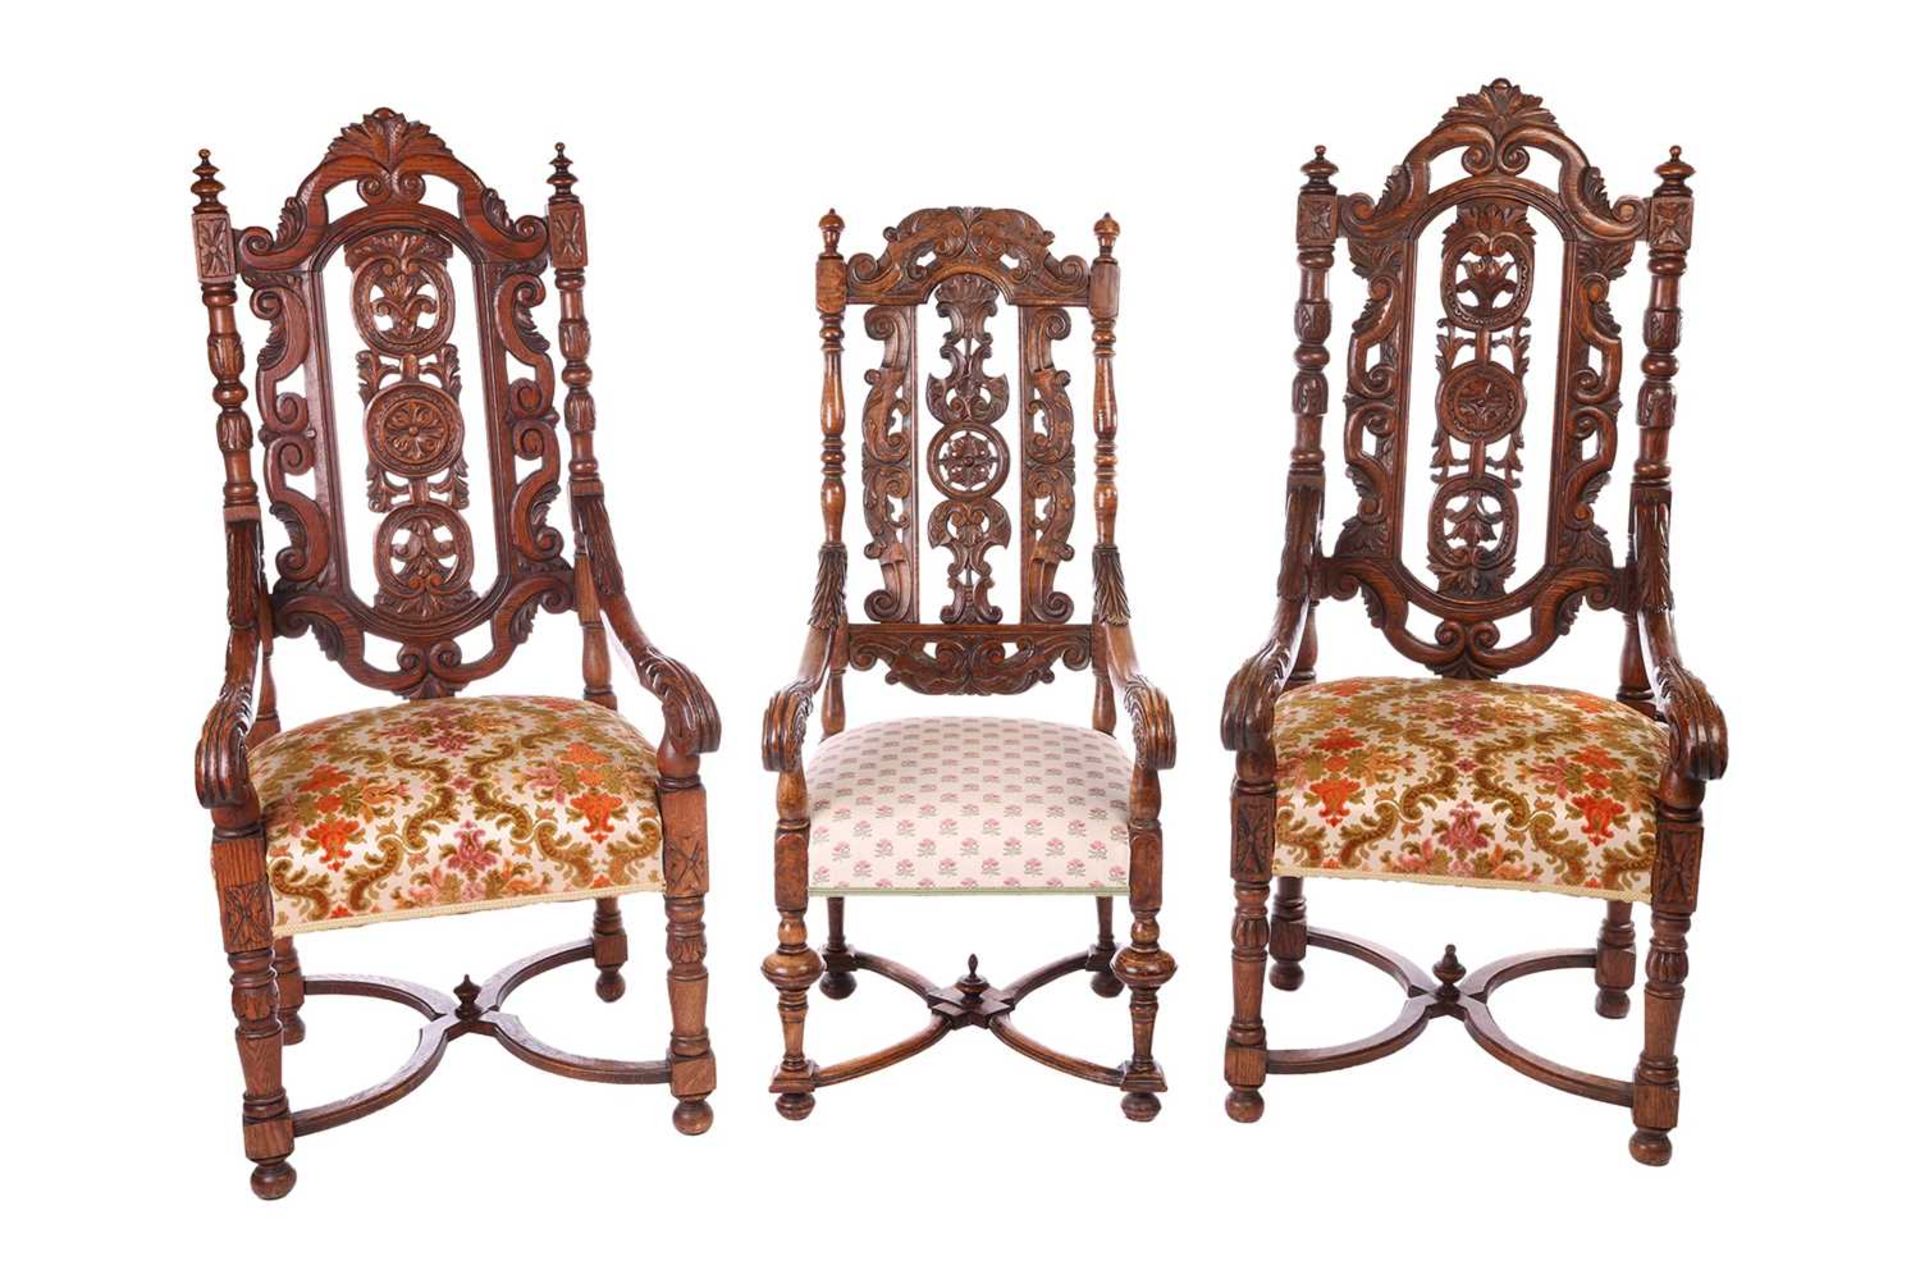 A near pair of Victorian carved oak open armchairs, in the Carolean style, with open S-Scroll, roset